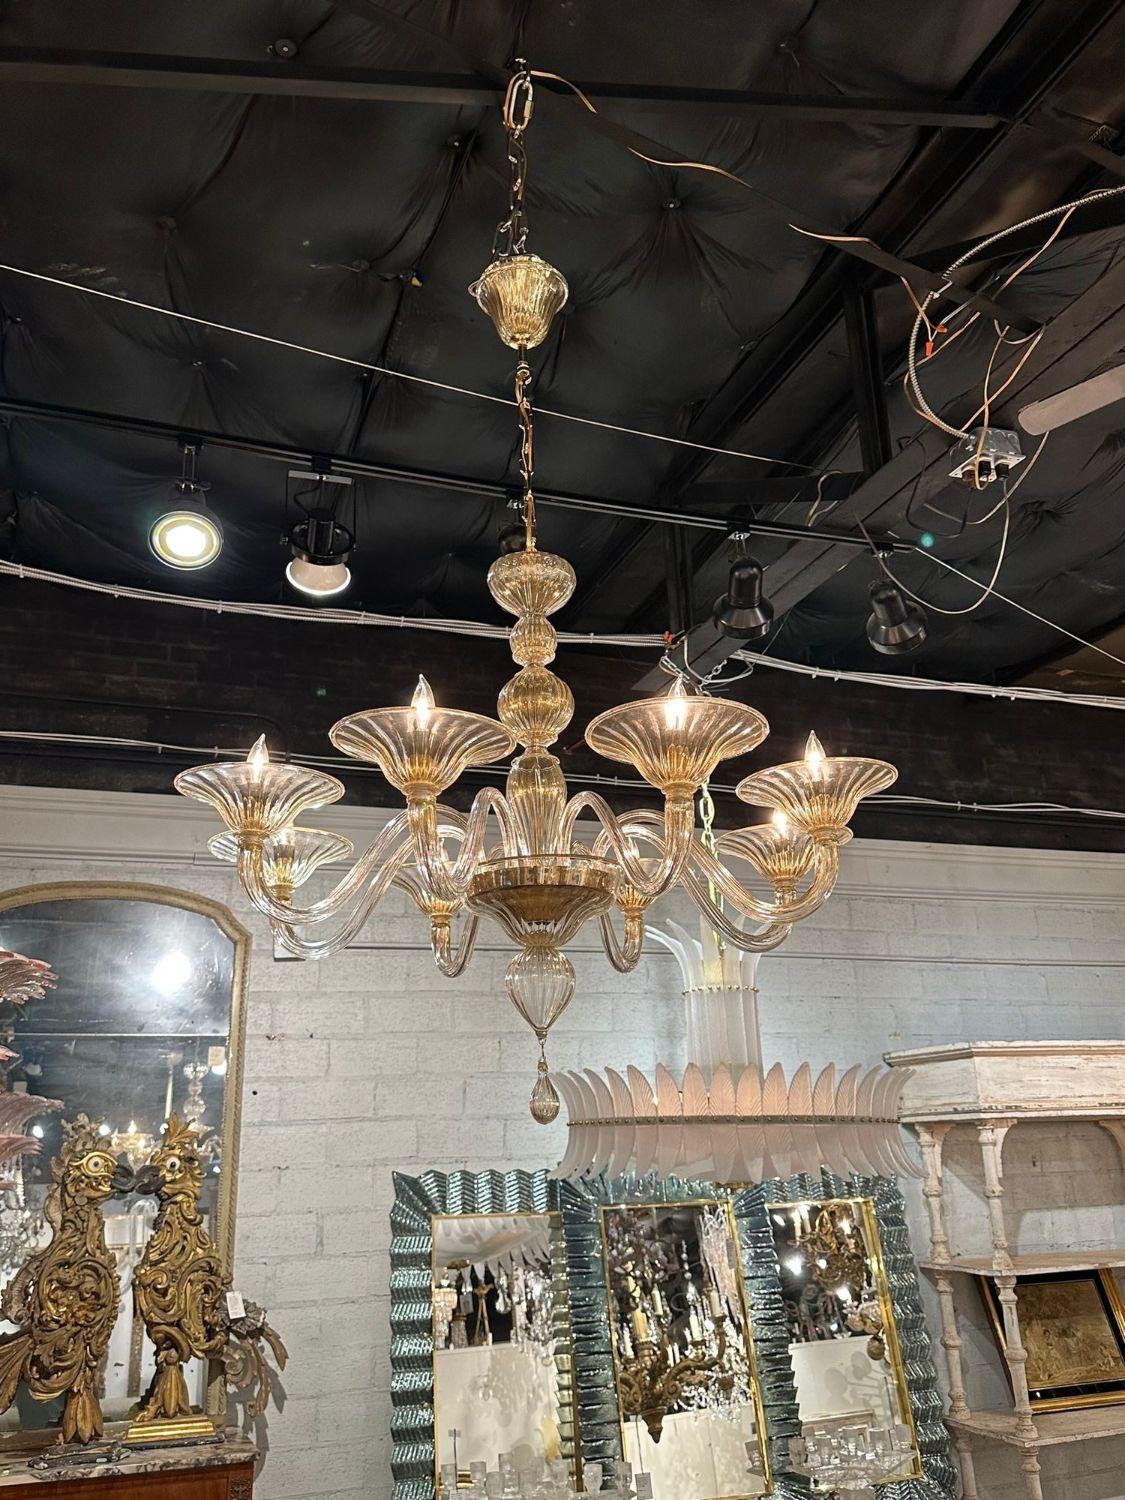 Lovely modern gold glass Murano chandelier with 8 arms. Makes a beautiful statement!